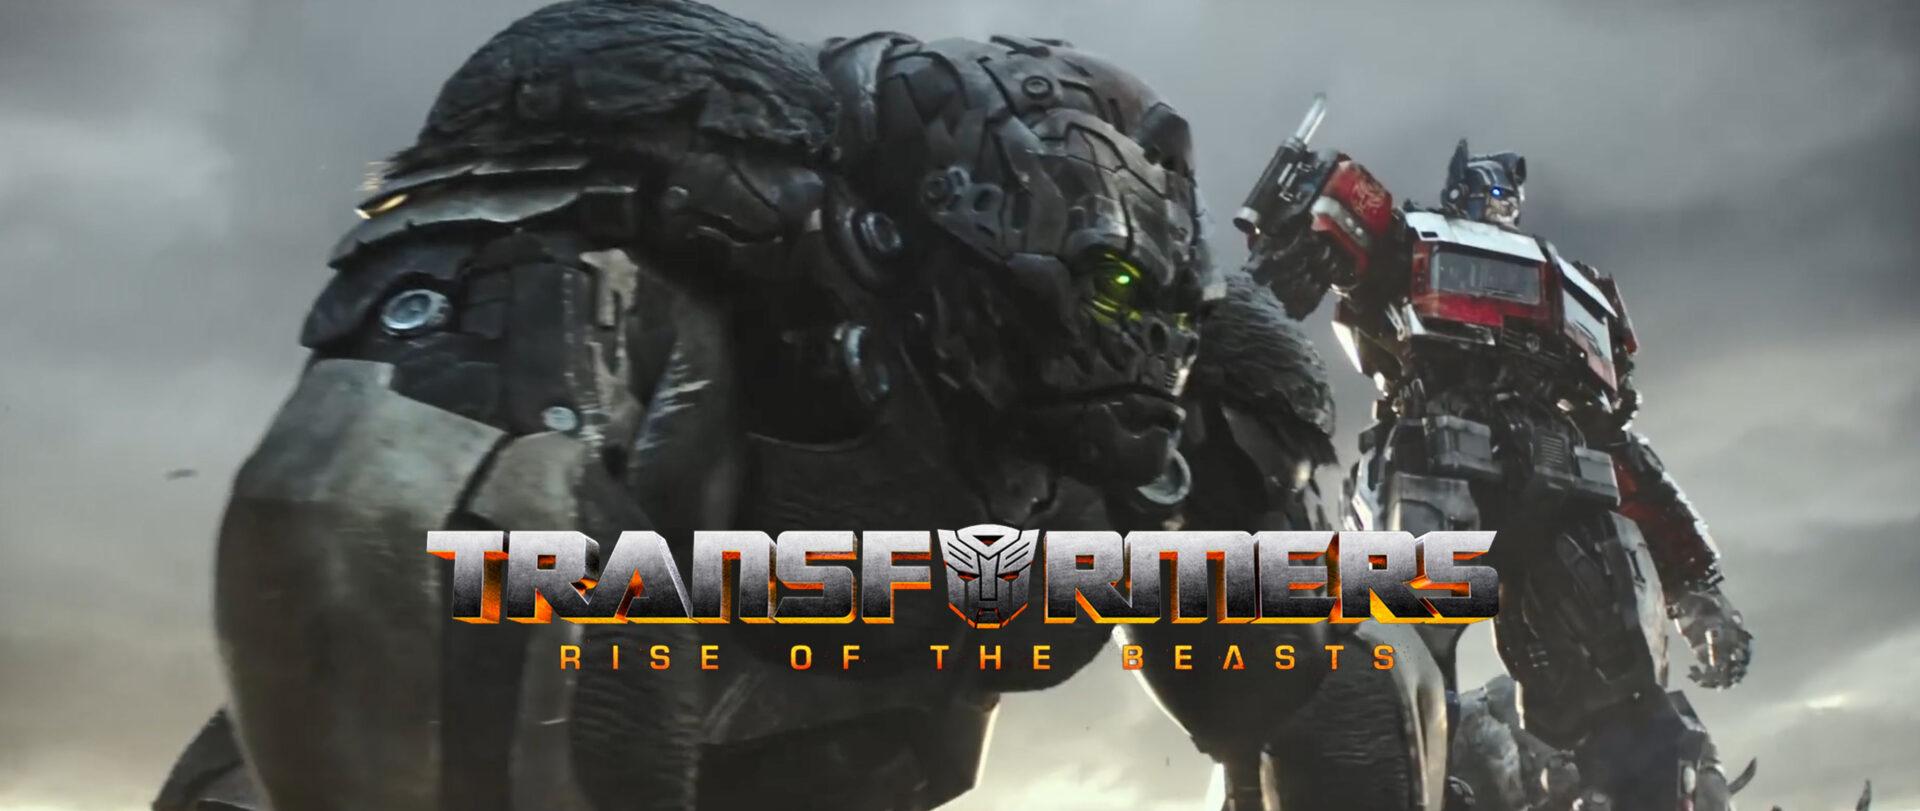 Trailer Optimus Prime And The Transformers Battles Unicron In